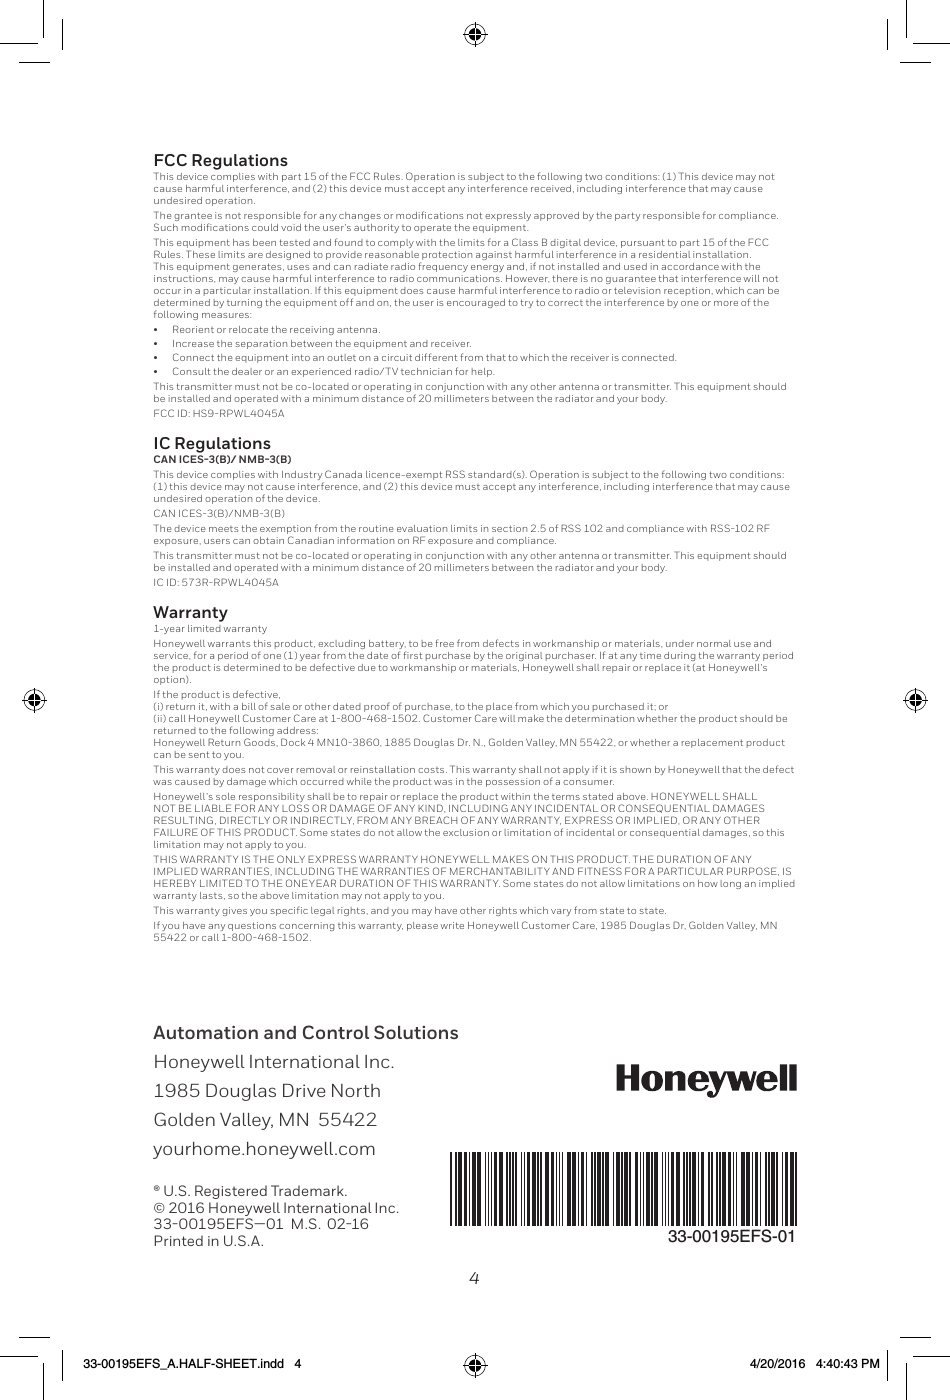 4Automation and Control Solutions Honeywell International Inc. 1985 Douglas Drive North Golden Valley, MN  55422 yourhome.honeywell.com® U.S. Registered Trademark.© 2016 Honeywell International Inc.33-00195EFS—01  M.S.  02-16Printed in U.S.A.33-00195EFS-01FCC Regulationsundesired operation.Rules. These limits are designed to provide reasonable protection against harmful interference in a residential installation. This equipment generates, uses and can radiate radio frequency energy and, if not installed and used in accordance with the instructions, may cause harmful interference to radio communications. However, there is no guarantee that interference will not occur in a particular installation. If this equipment does cause harmful interference to radio or television reception, which can be determined by turning the equipment off and on, the user is encouraged to try to correct the interference by one or more of the following measures:•  Reorient or relocate the receiving antenna.•  Increase the separation between the equipment and receiver.•  Connect the equipment into an outlet on a circuit different from that to which the receiver is connected.•  Consult the dealer or an experienced radio/TV technician for help.IC RegulationsCAN ICES-3(B)/ NMB-3(B)undesired operation of the device.exposure, users can obtain Canadian information on RF exposure and compliance. Warranty1-year limited warrantyHoneywell warrants this product, excluding battery, to be free from defects in workmanship or materials, under normal use and the product is determined to be defective due to workmanship or materials, Honeywell shall repair or replace it (at Honeywell’s option). If the product is defective,    returned to the following address:  can be sent to you. This warranty does not cover removal or reinstallation costs. This warranty shall not apply if it is shown by Honeywell that the defect was caused by damage which occurred while the product was in the possession of a consumer. Honeywell’s sole responsibility shall be to repair or replace the product within the terms stated above. HONEYWELL SHALL NOT BE LIABLE FOR ANY LOSS OR DAMAGE OF ANY KIND, INCLUDING ANY INCIDENTAL OR CONSEQUENTIAL DAMAGES RESULTING, DIRECTLY OR INDIRECTLY, FROM ANY BREACH OF ANY WARRANTY, EXPRESS OR IMPLIED, OR ANY OTHER FAILURE OF THIS PRODUCT. Some states do not allow the exclusion or limitation of incidental or consequential damages, so this limitation may not apply to you. THIS WARRANTY IS THE ONLY EXPRESS WARRANTY HONEYWELL MAKES ON THIS PRODUCT. THE DURATION OF ANY IMPLIED WARRANTIES, INCLUDING THE WARRANTIES OF MERCHANTABILITY AND FITNESS FOR A PARTICULAR PURPOSE, IS HEREBY LIMITED TO THE ONEYEAR DURATION OF THIS WARRANTY. Some states do not allow limitations on how long an implied warranty lasts, so the above limitation may not apply to you.  33-00195EFS_A.HALF-SHEET.indd   4 4/20/2016   4:40:43 PM